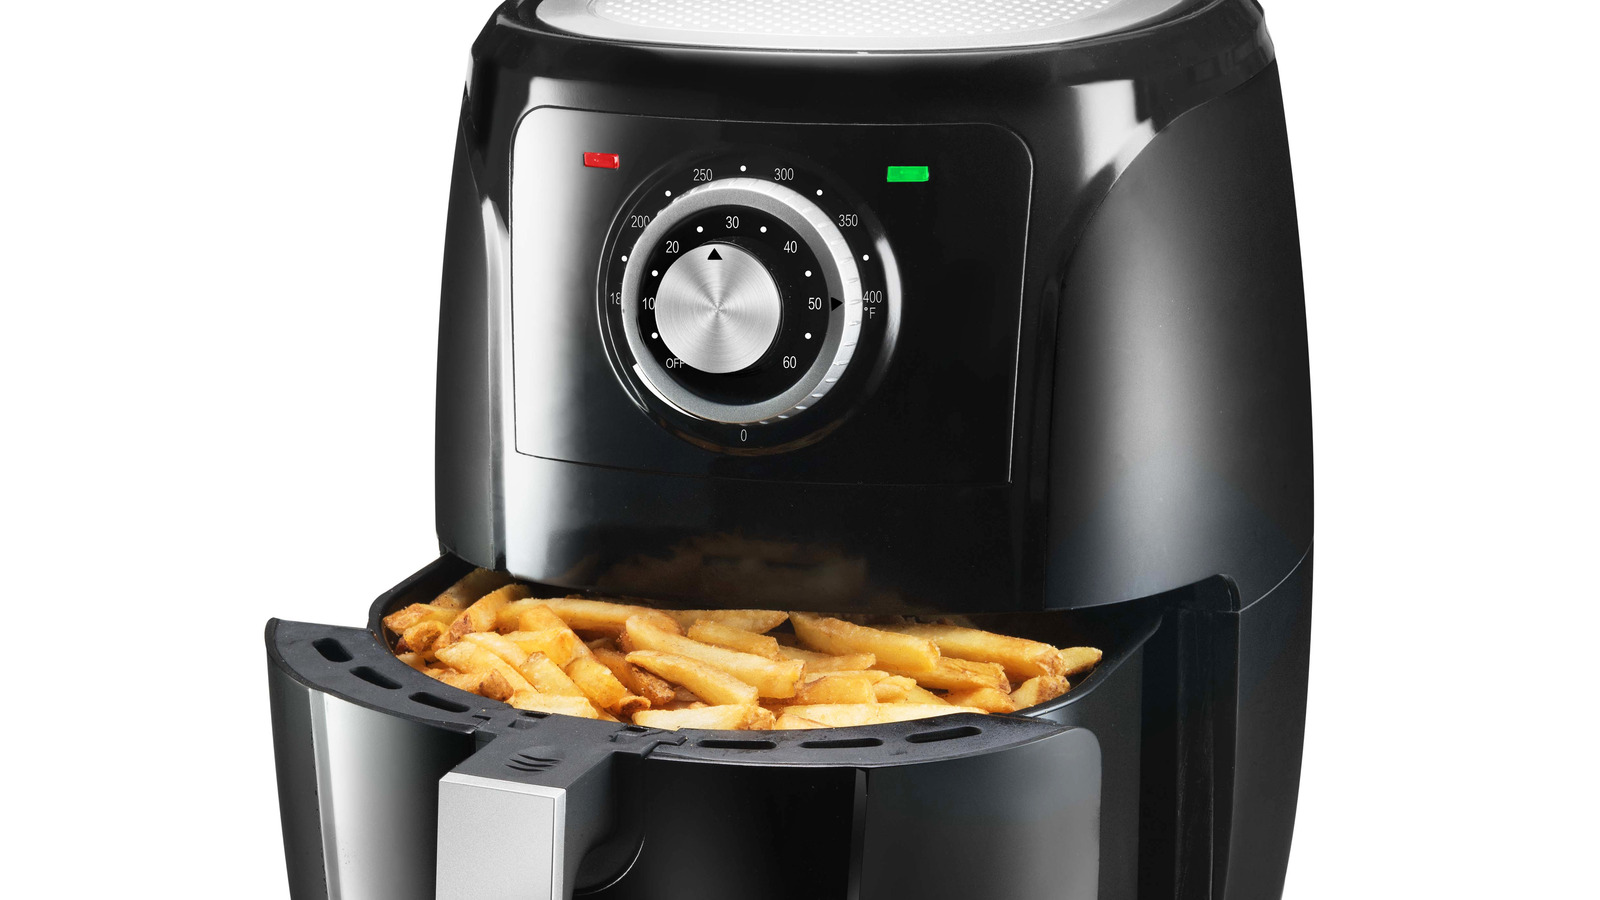 Is Your Air Fryer Safe? 2 Million Recalled Due to Dangerous